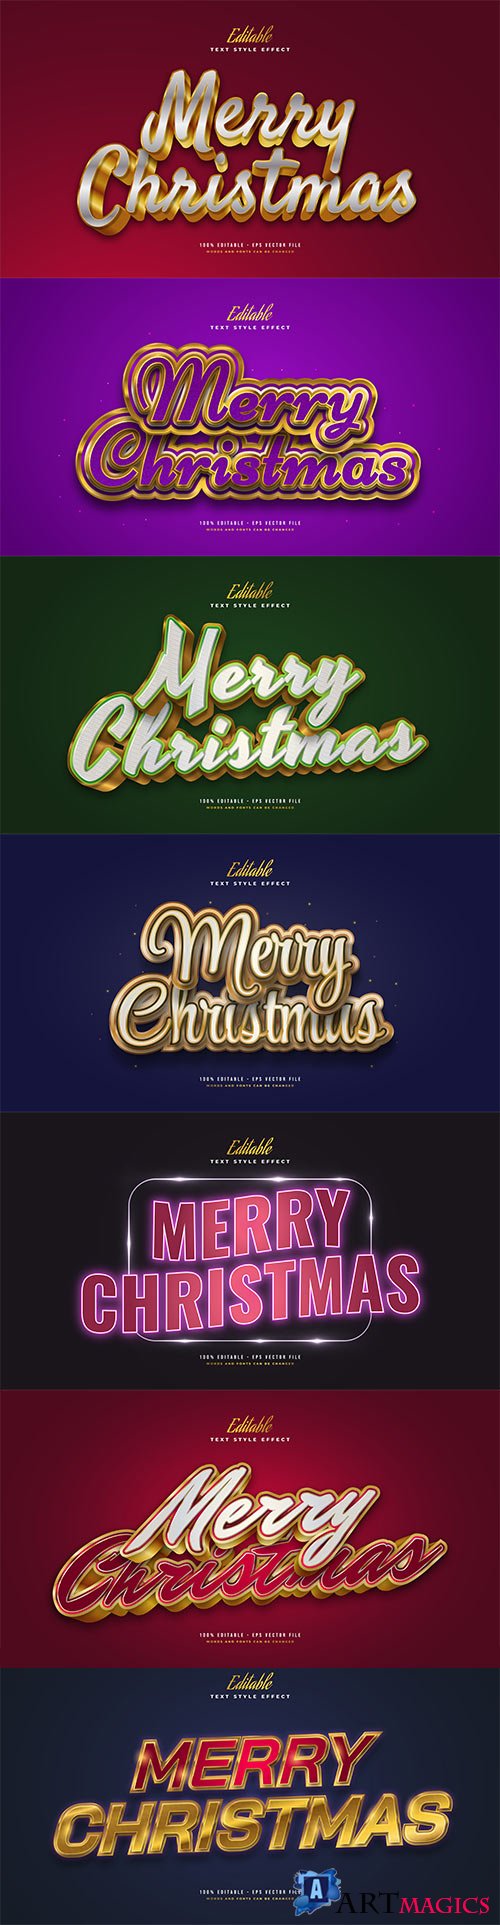 Merry christmas and happy new year 2022 editable vector text effects vol 20